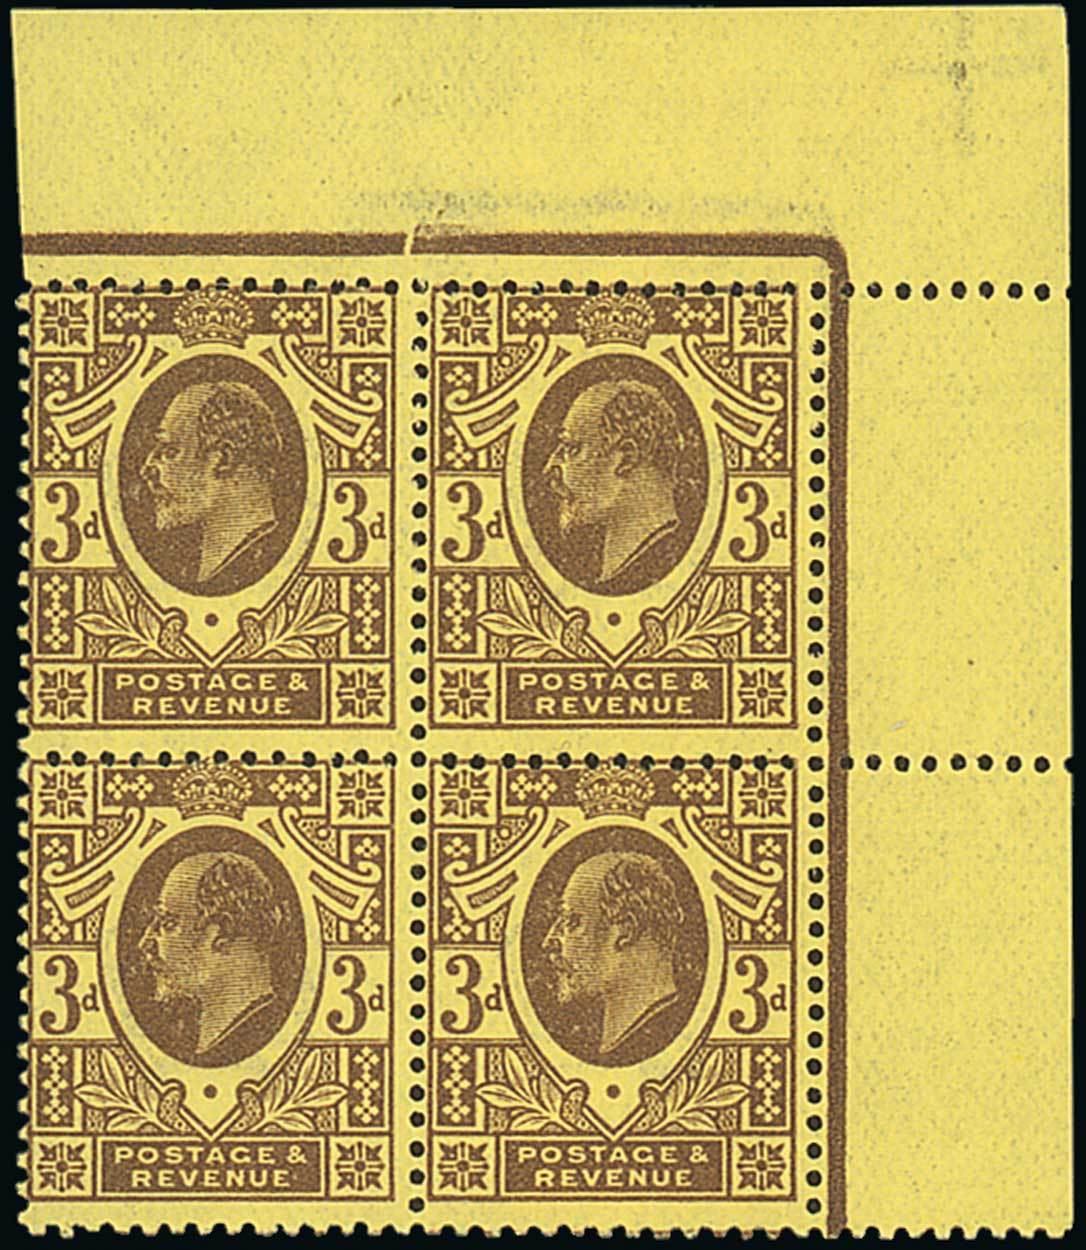 Great Britain King Edward VII Issues 1911 Harrison and Sons, Perforation 14 3d. dull reddish purple